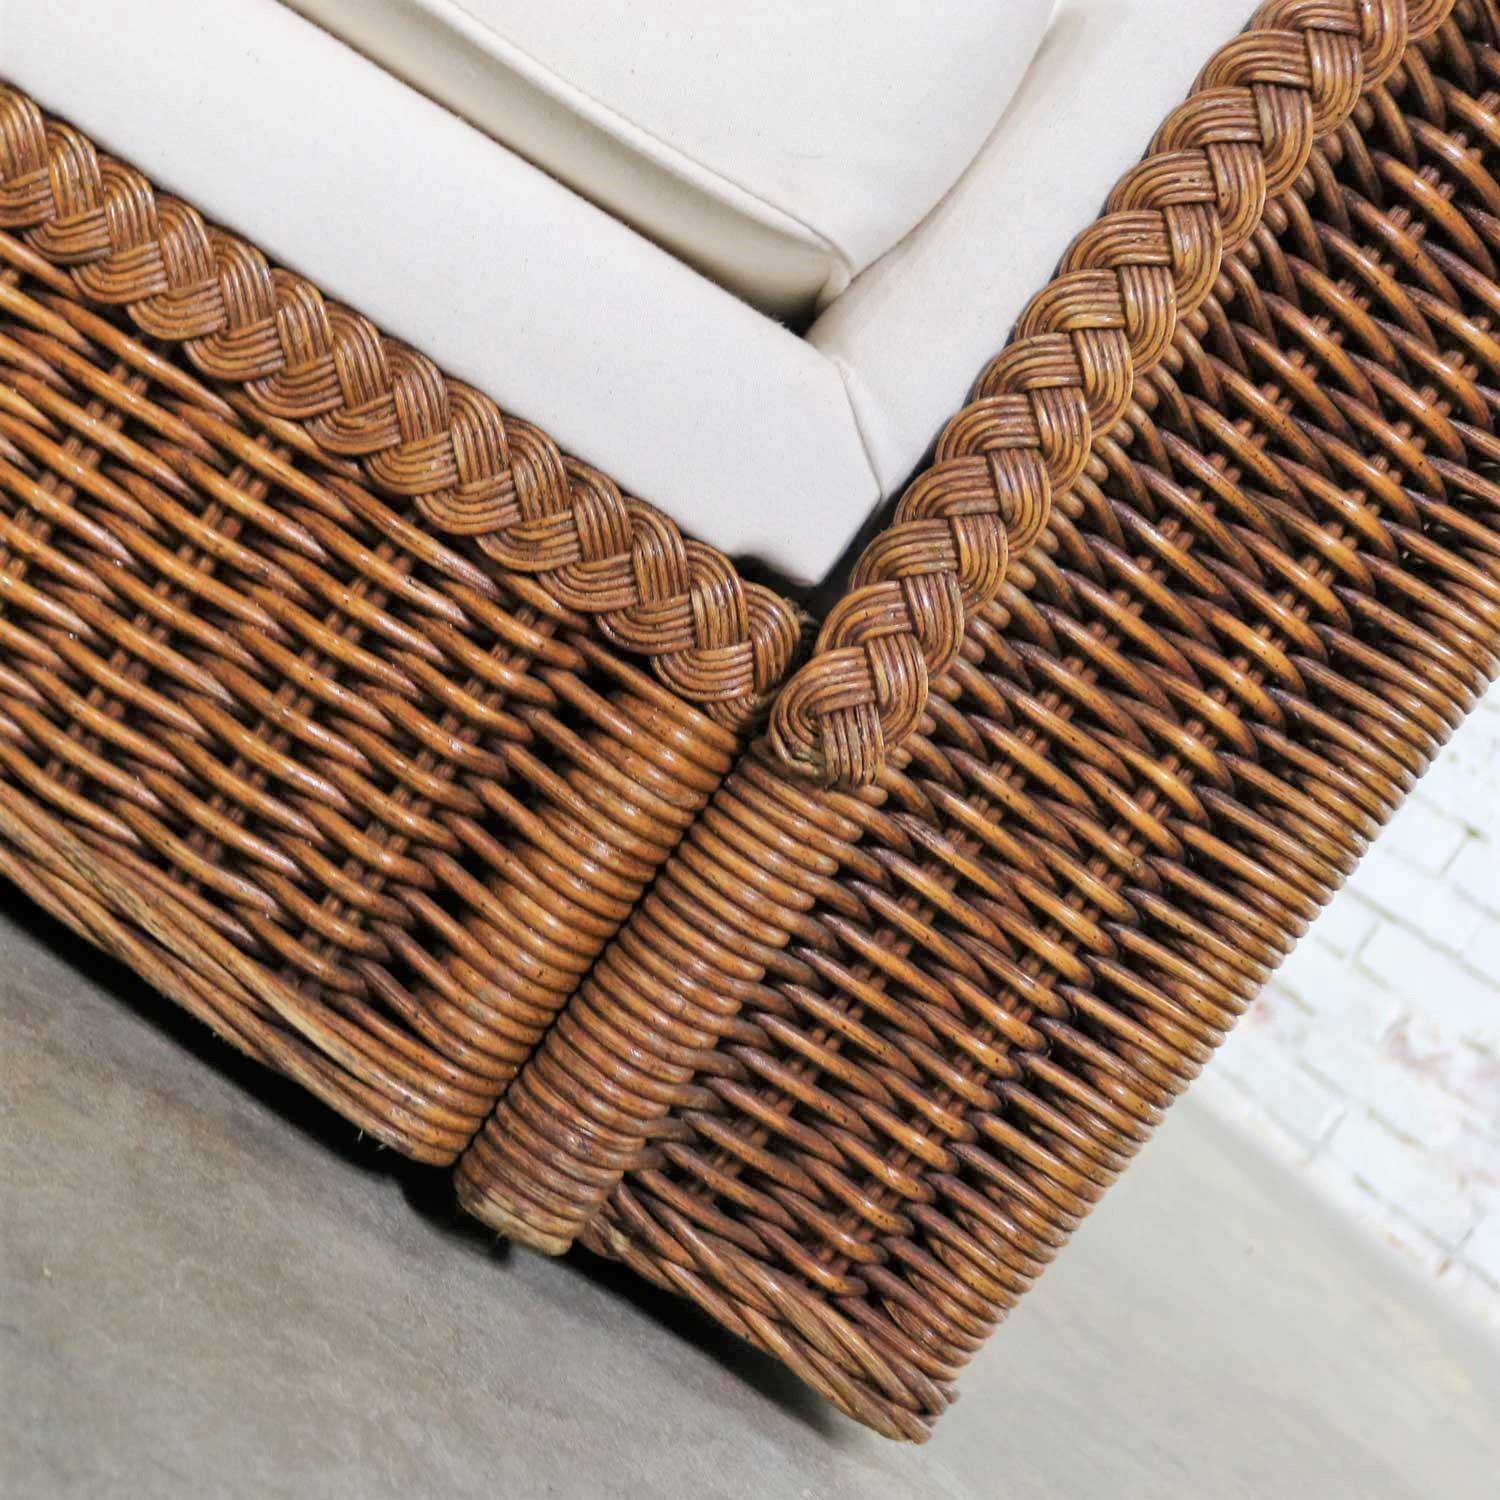 Vintage Modern Wicker Sofa Manner Michael Taylor in New White Canvas 7